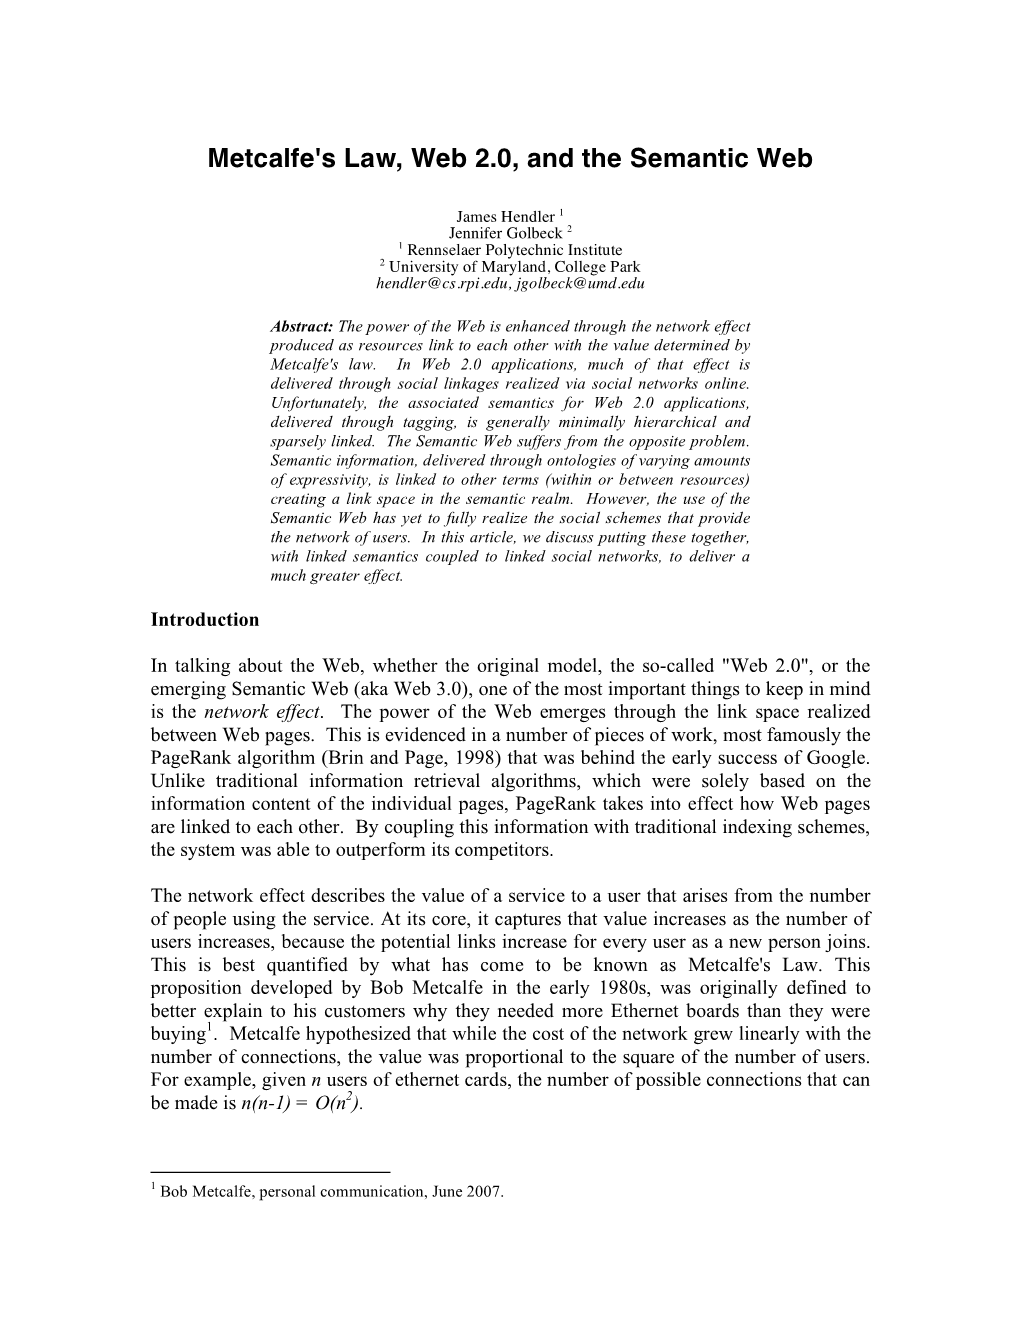 Metcalfe's Law, Web 2.0, and the Semantic Web